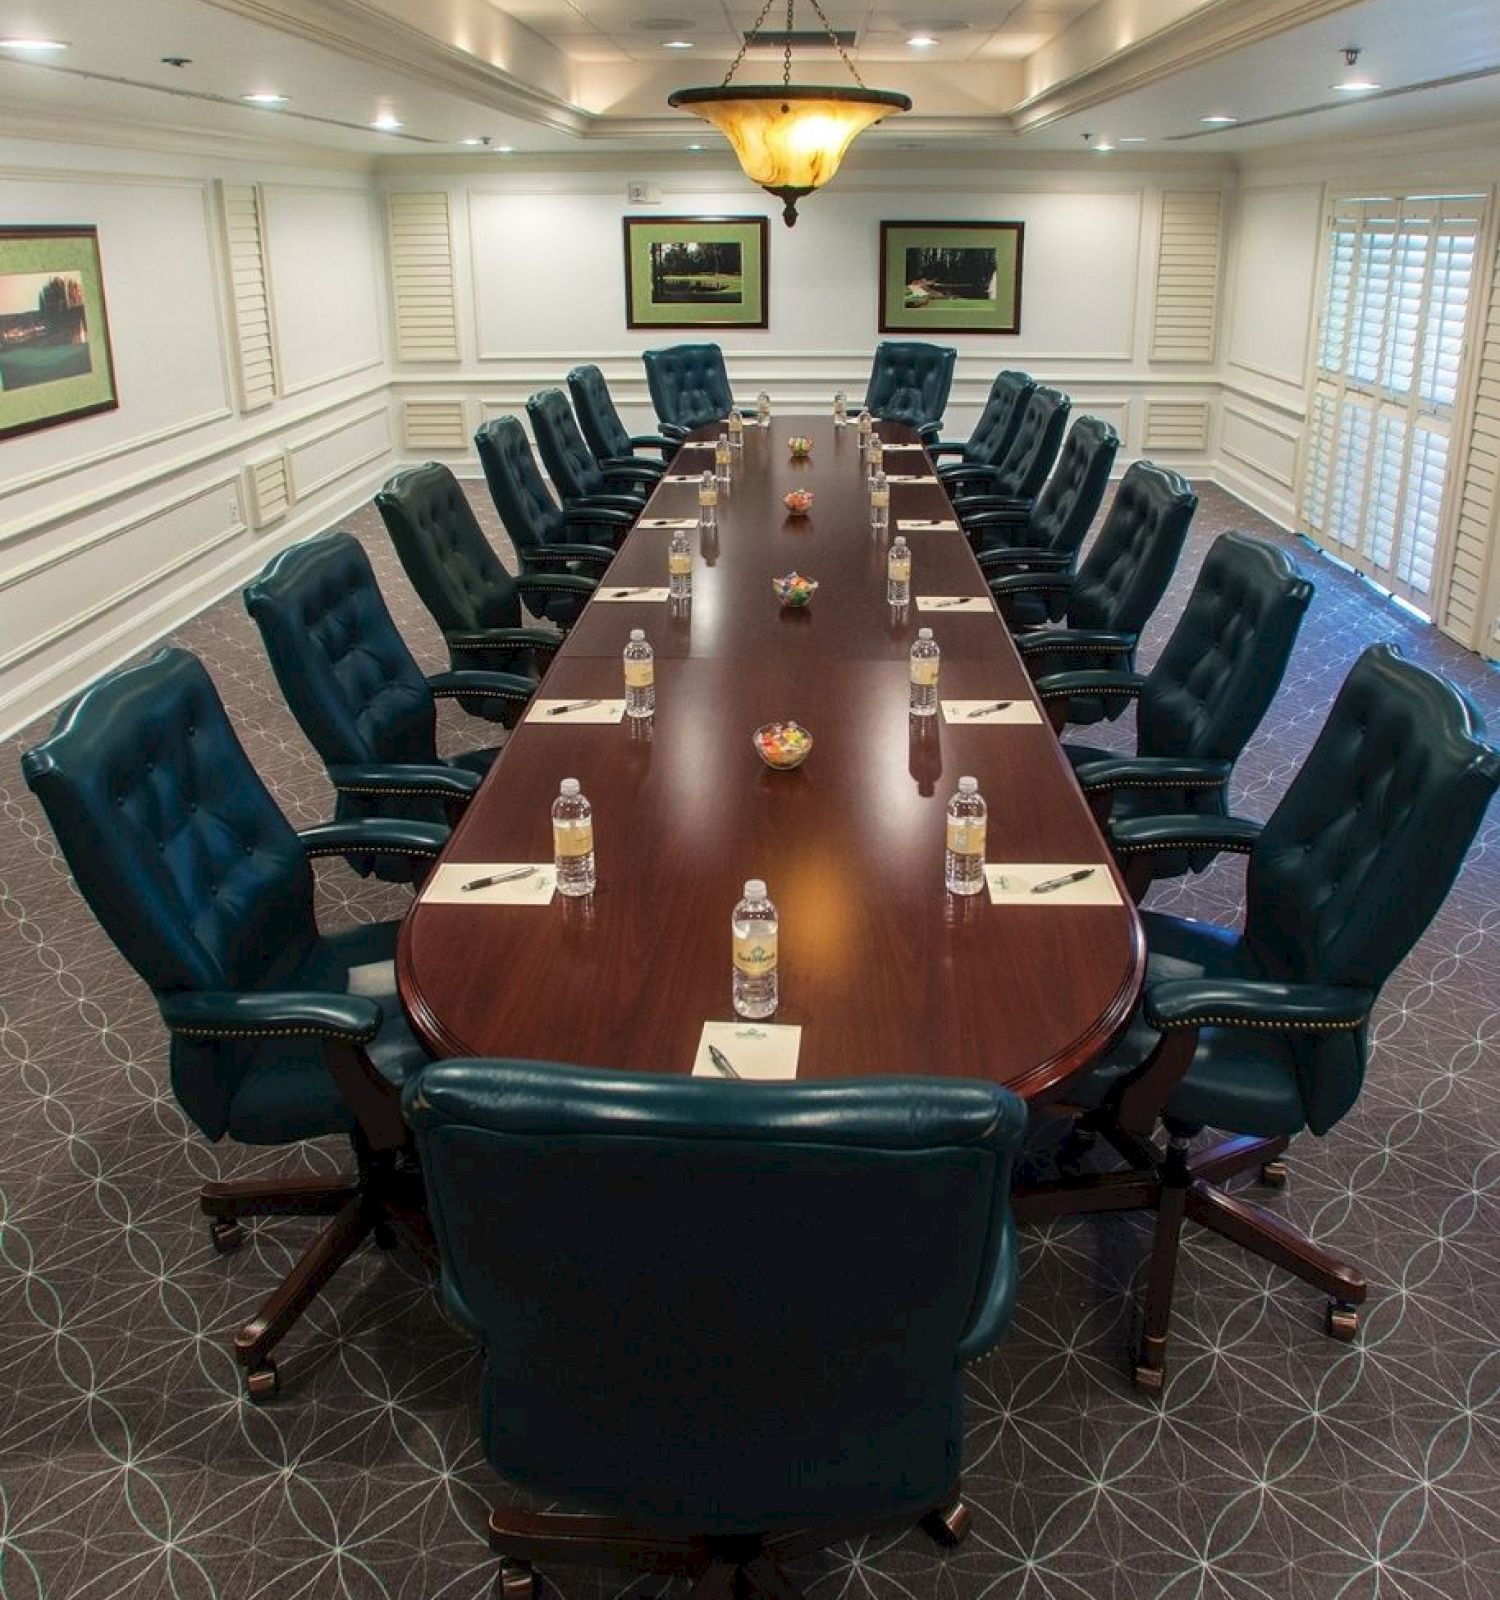 A boardroom with a long table, green chairs, water bottles, and notepads set up for a meeting in a room with framed artwork and a chandelier.